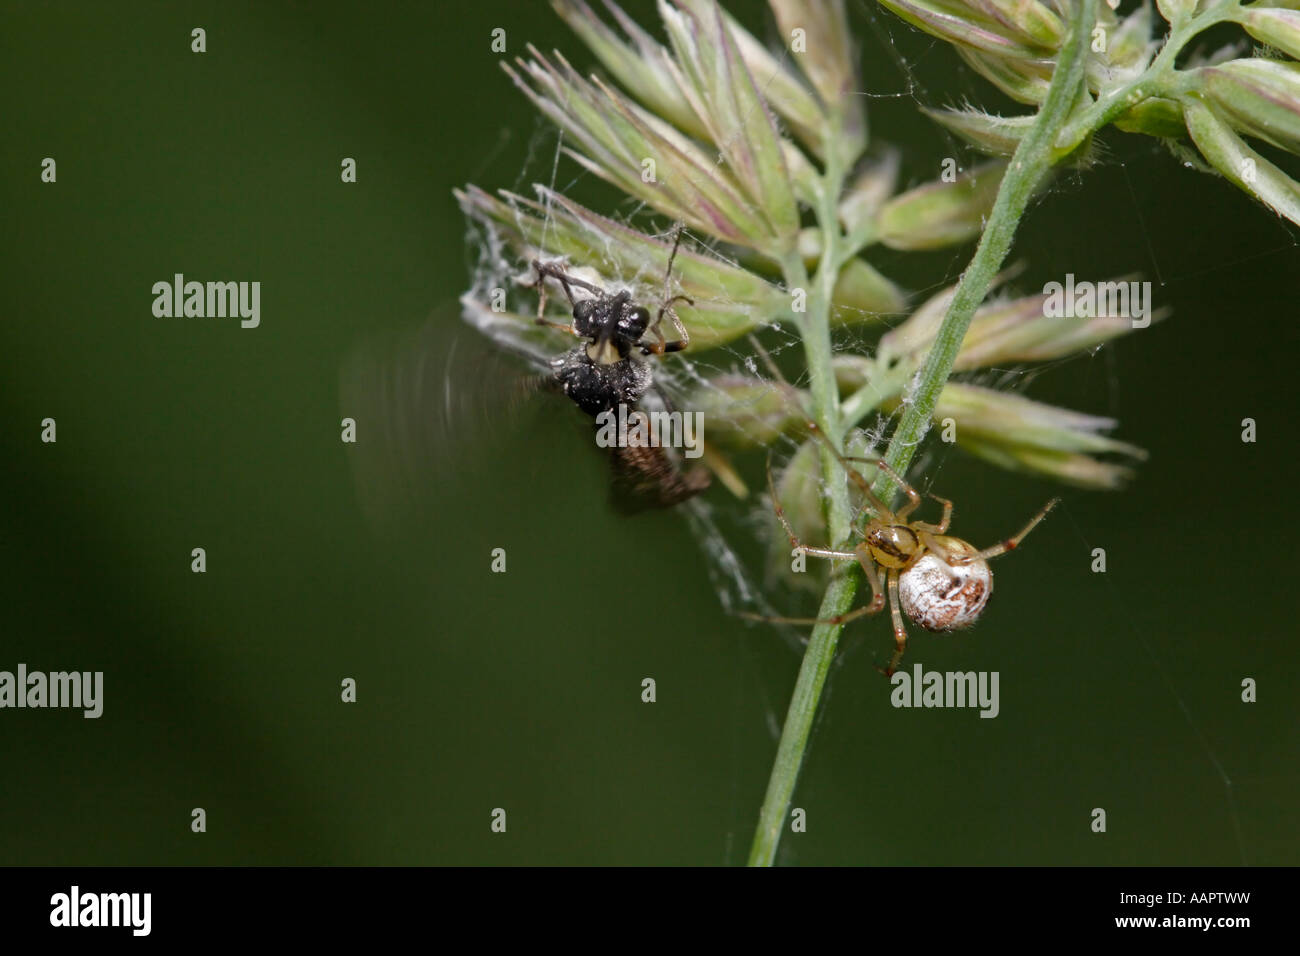 Spider catching wasp (Theridion impressum and sawfly) Stock Photo